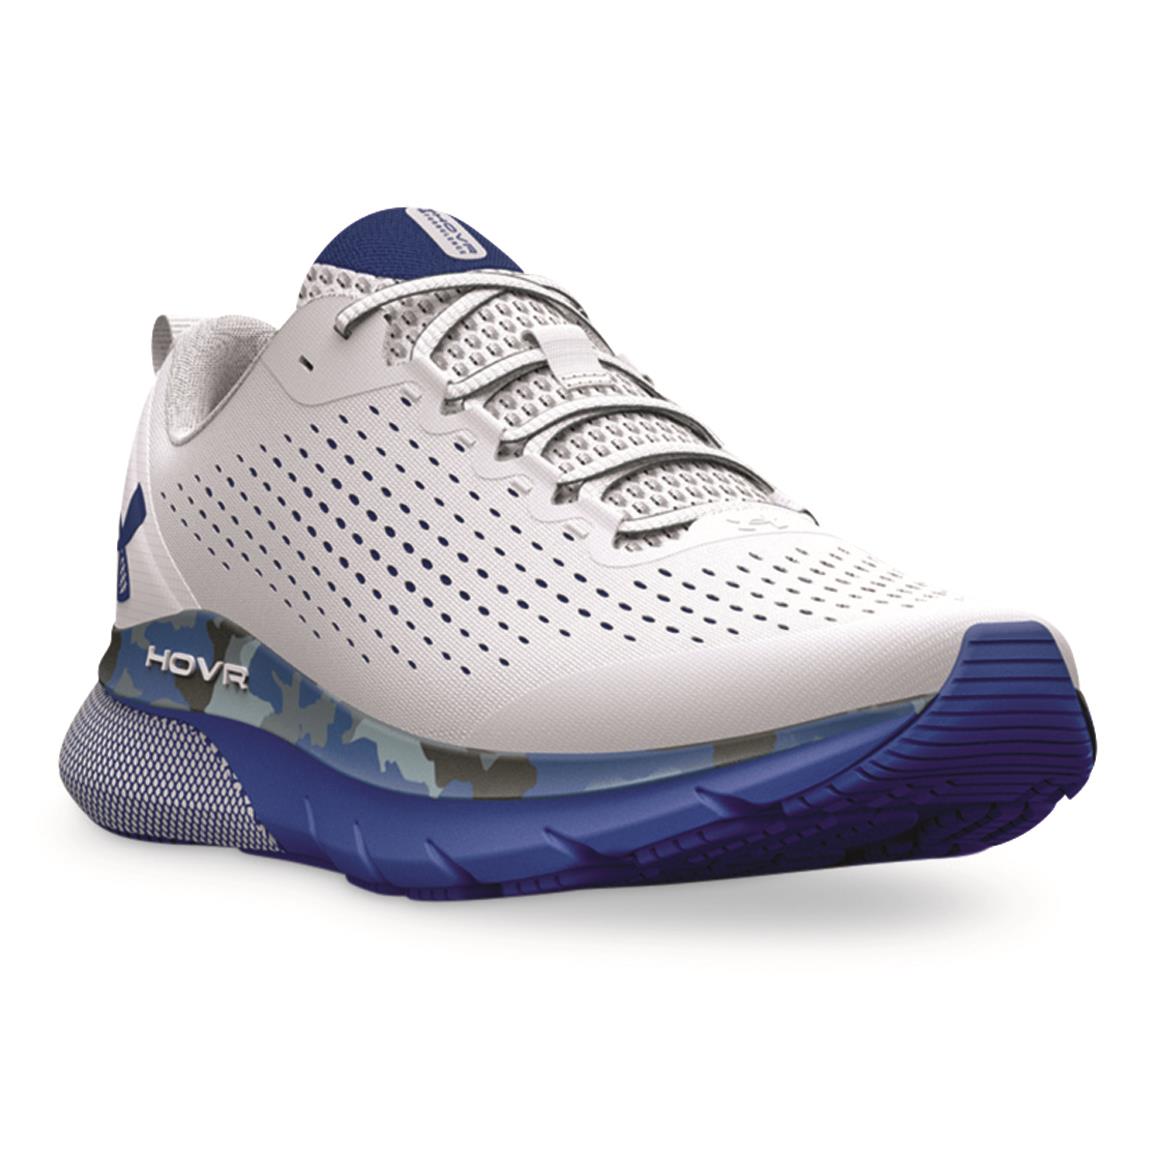 Under Armour Men's HOVR Turbulence Running Shoes, White/white/blue Mirage